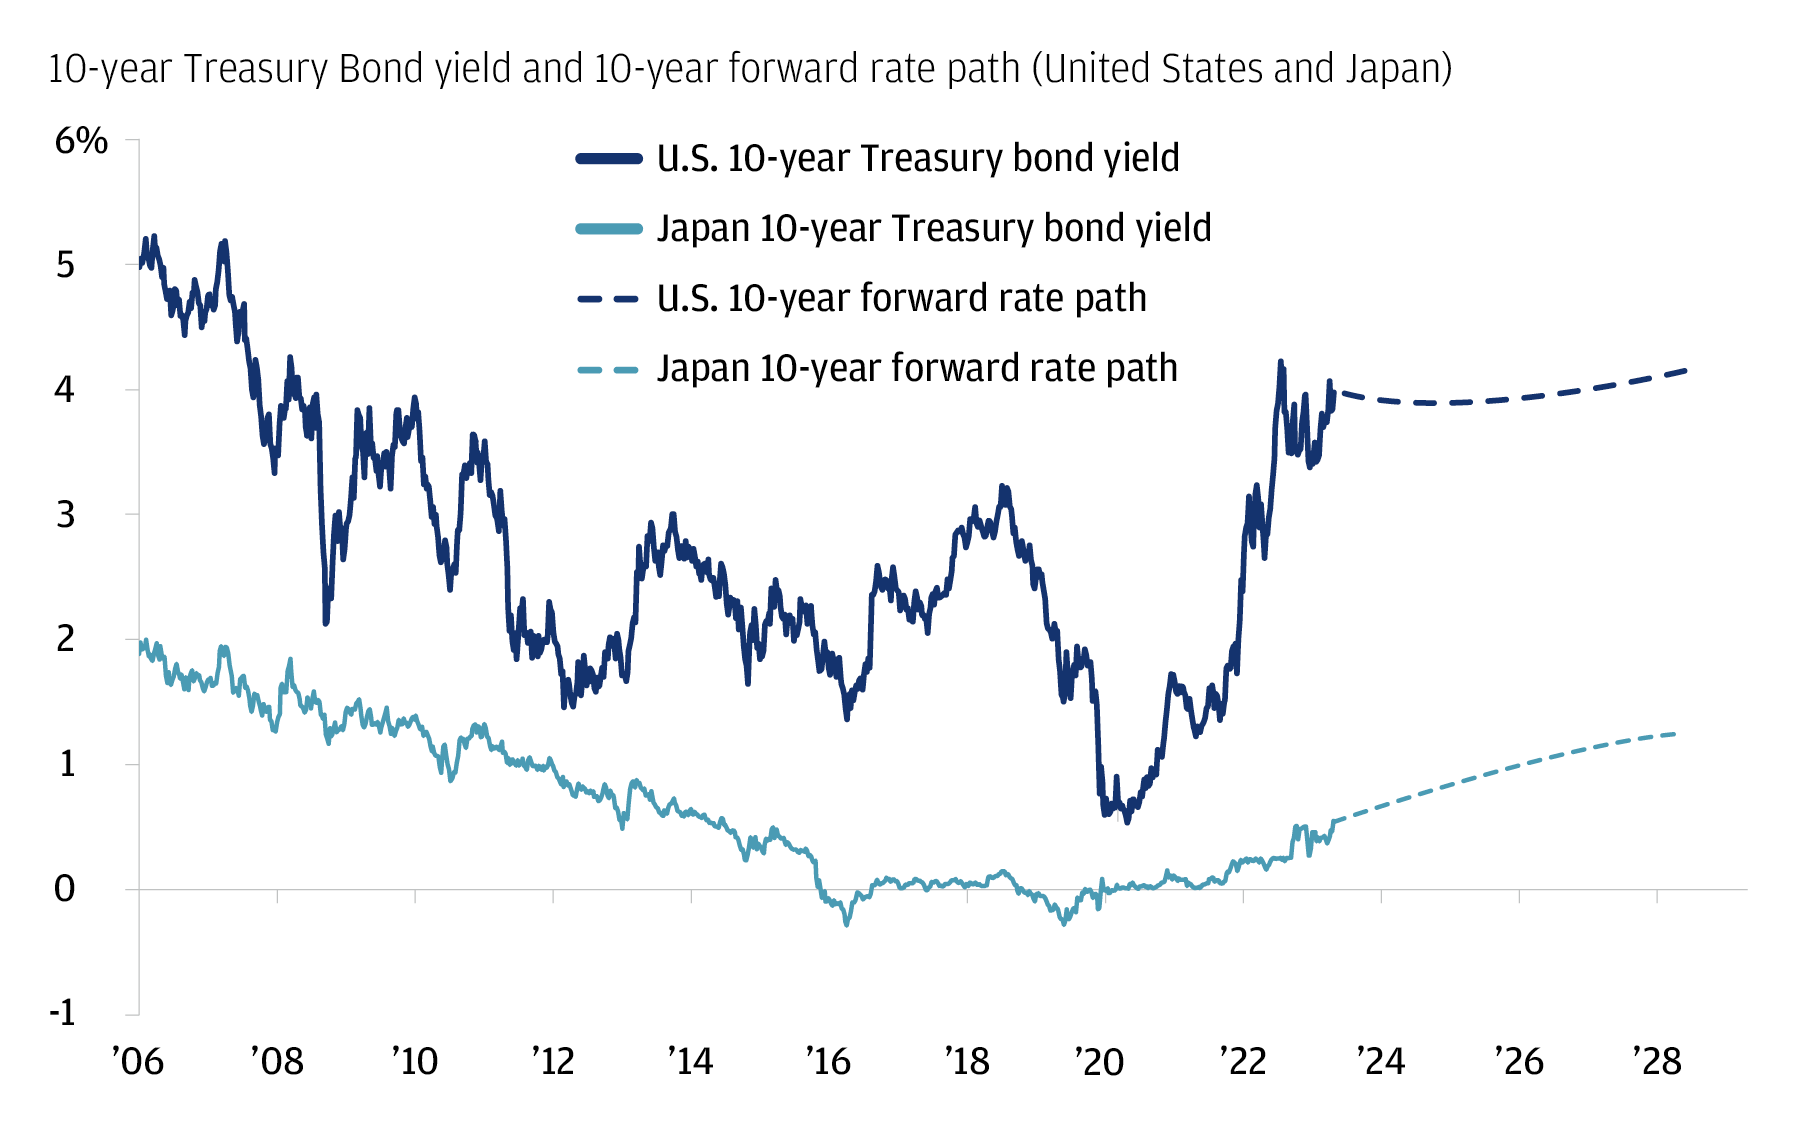 The chart describes the 10-year Treasury Bond yield & the 10-year forward rate path for U.S. and Japan.